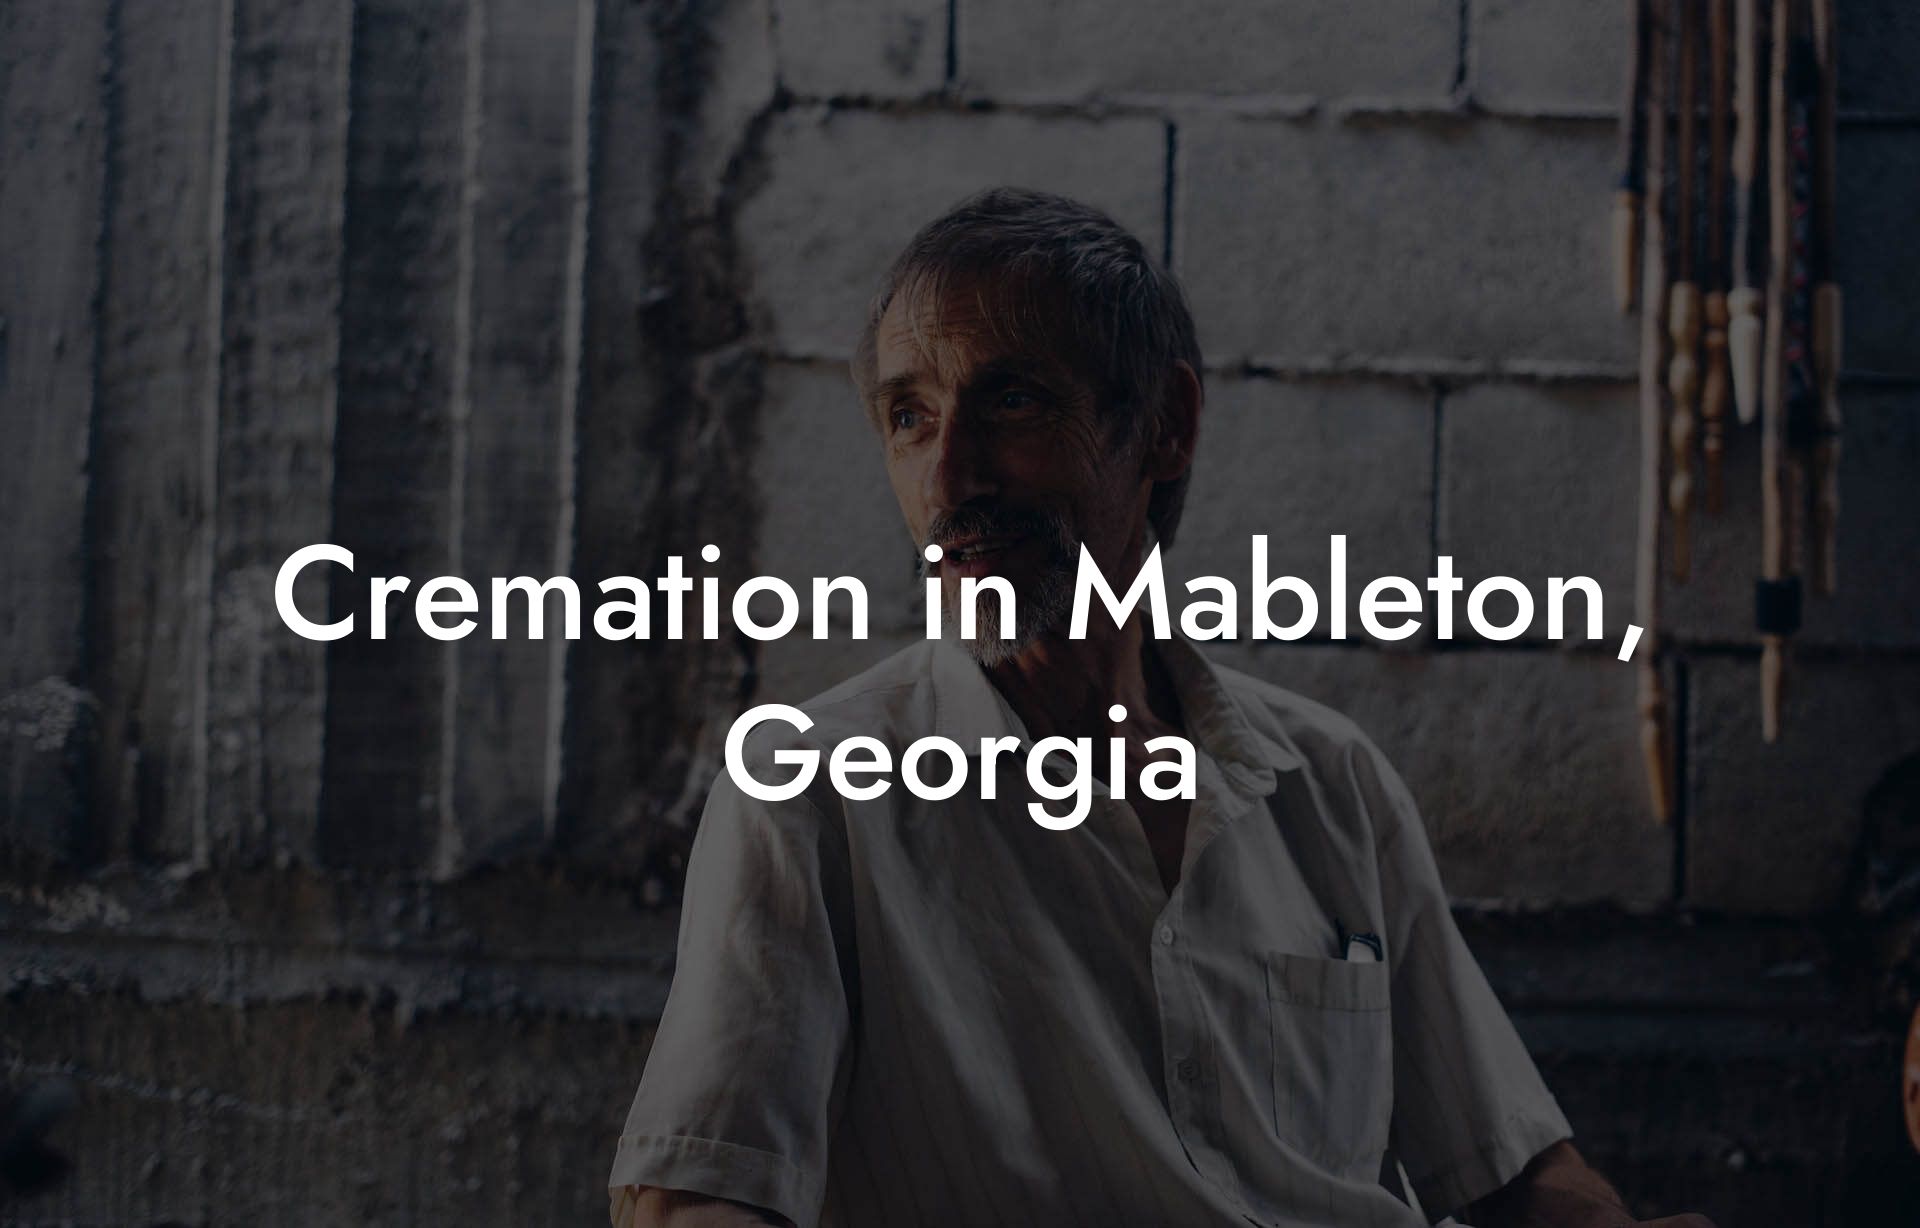 Cremation in Mableton, Georgia